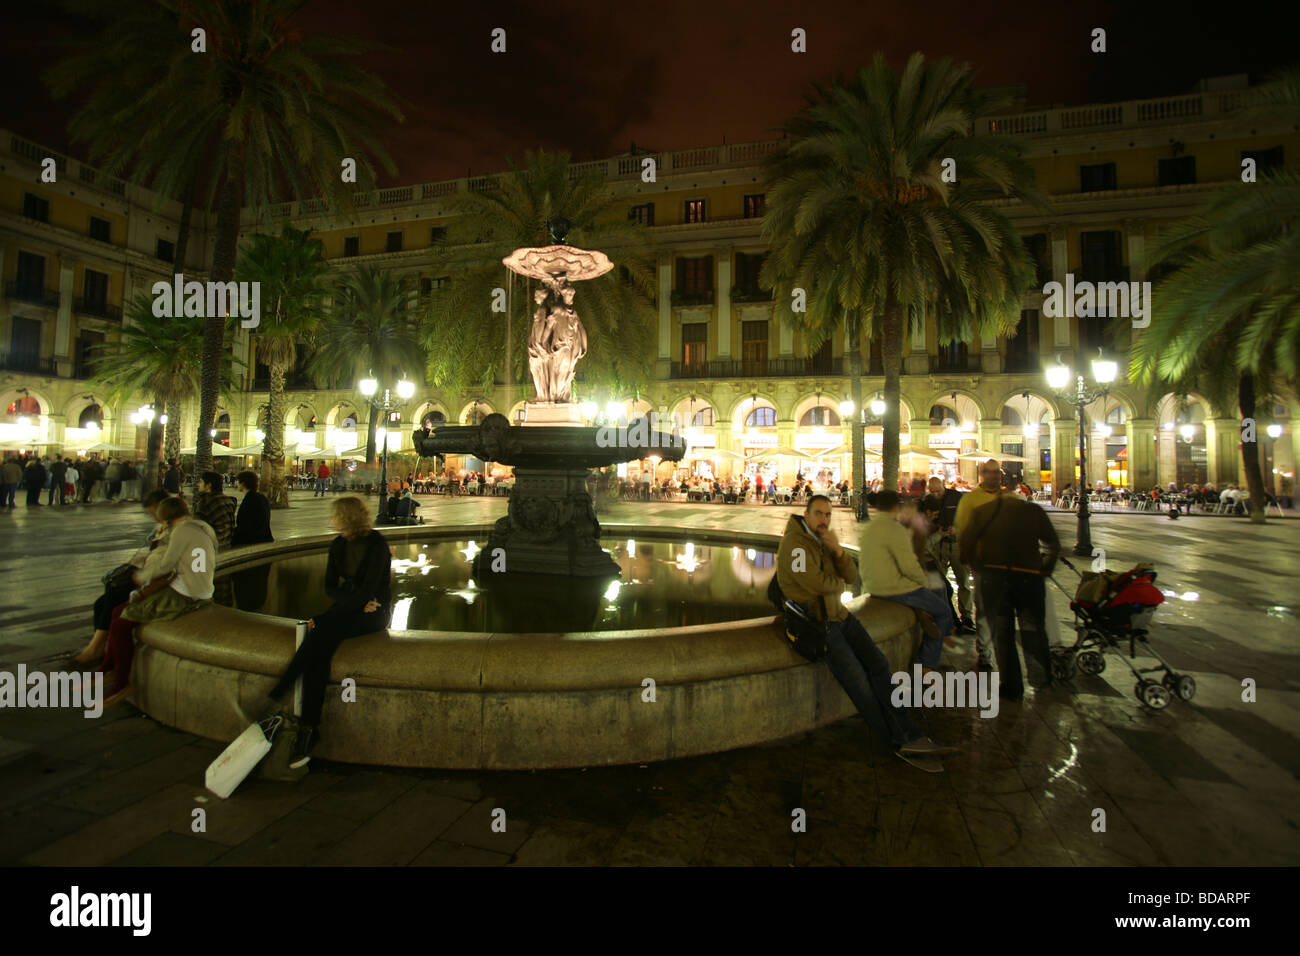 Fountain at Plaça Reial in the city of Barcelona in Spain Stock Photo